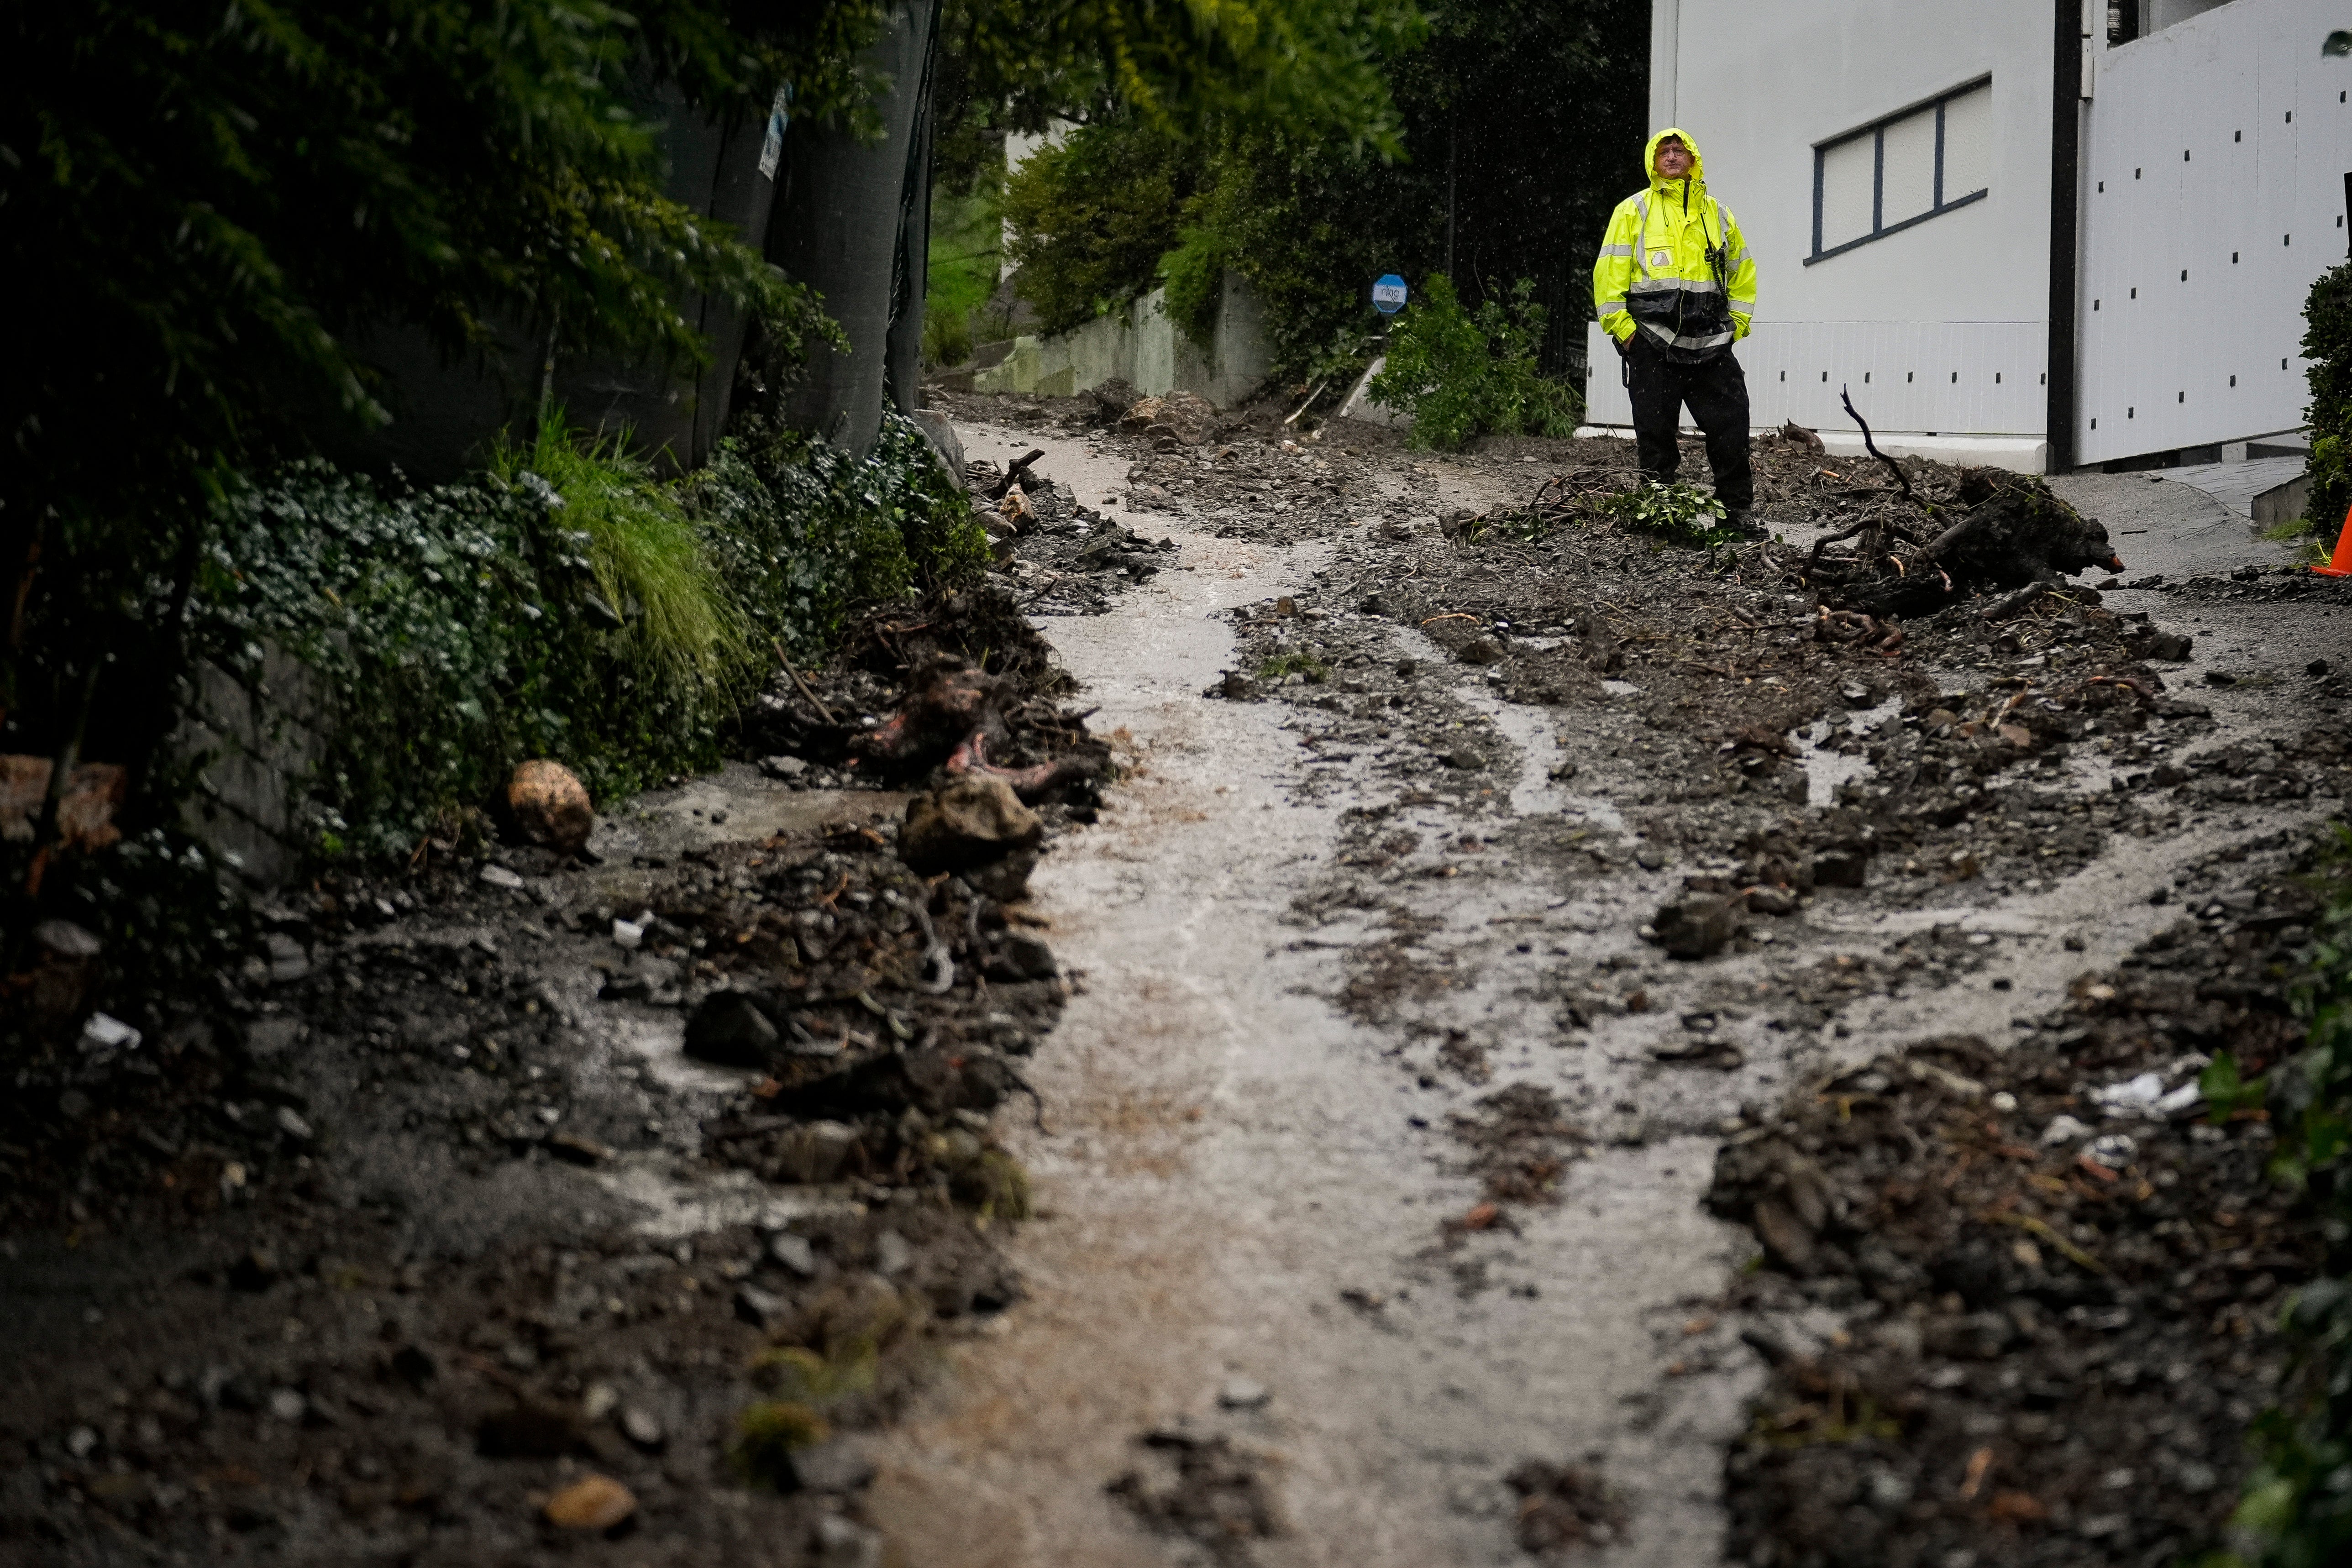 Previous atmospheric river storms caused destruction in Los Angeles County